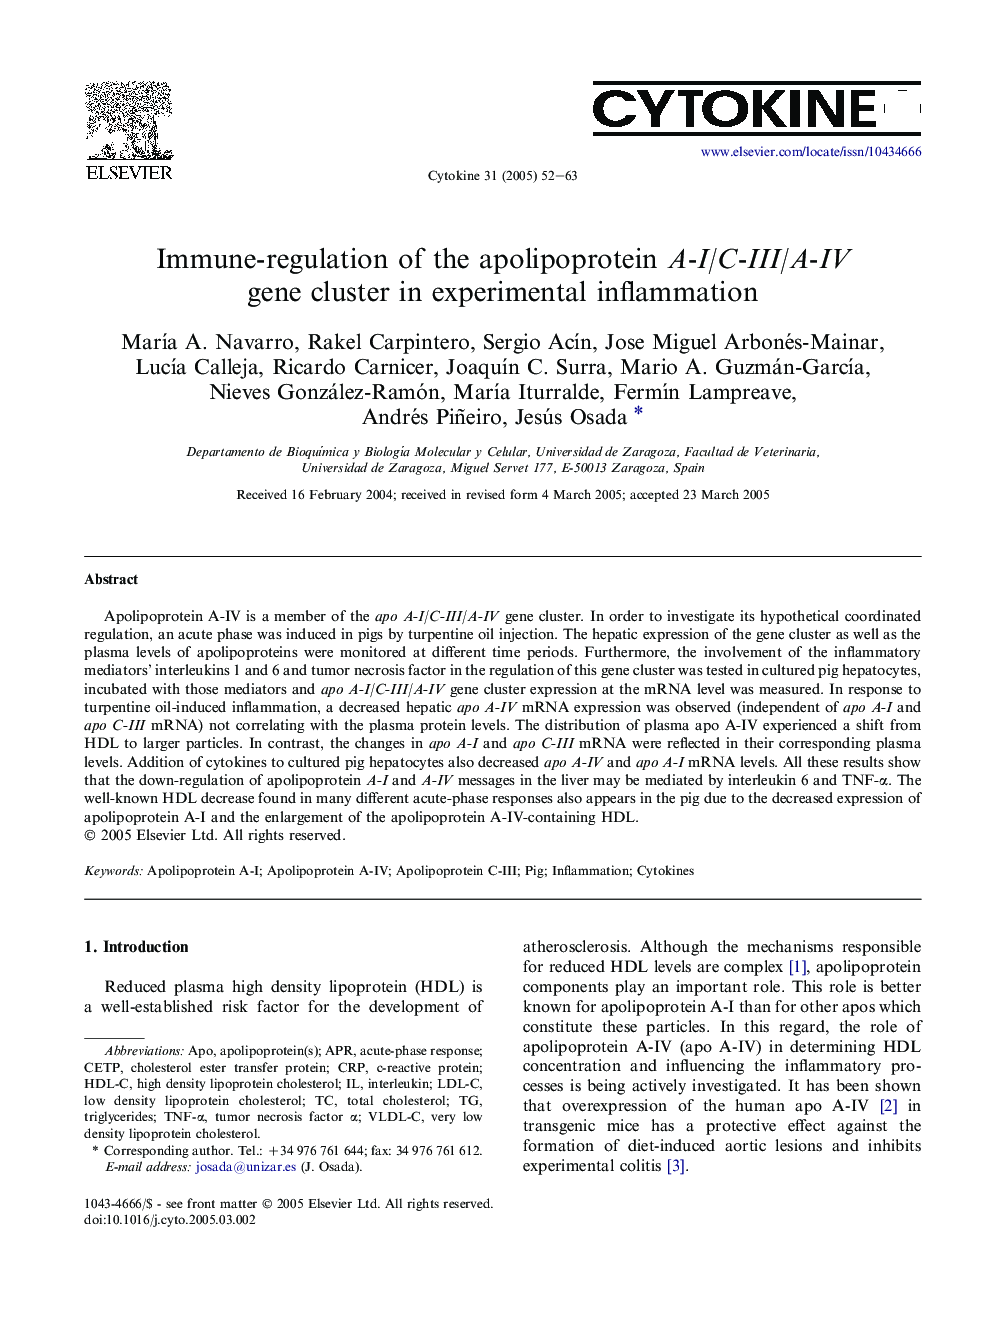 Immune-regulation of the apolipoprotein A-I/C-III/A-IV gene cluster in experimental inflammation